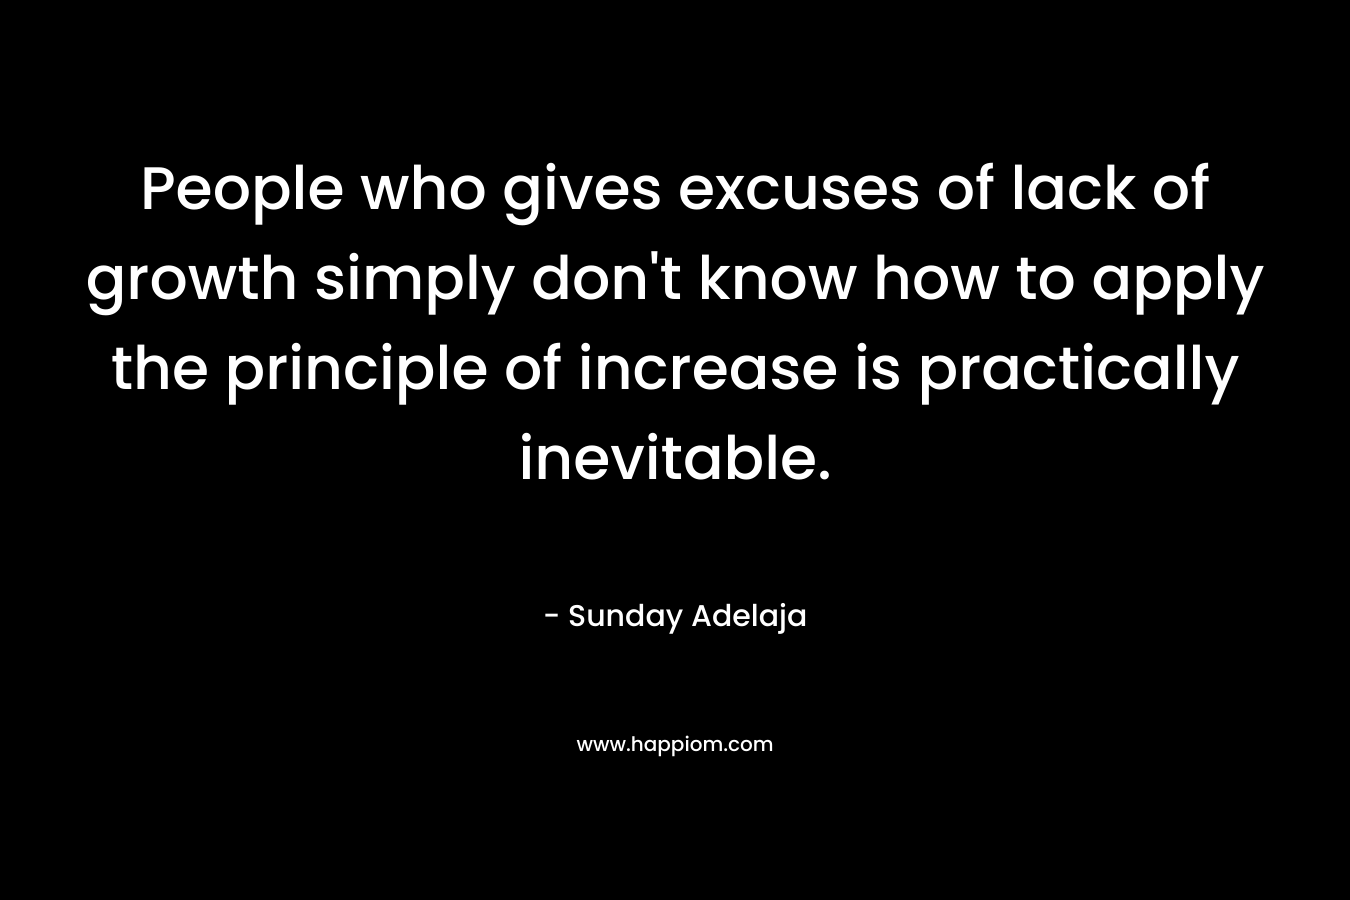 People who gives excuses of lack of growth simply don't know how to apply the principle of increase is practically inevitable.